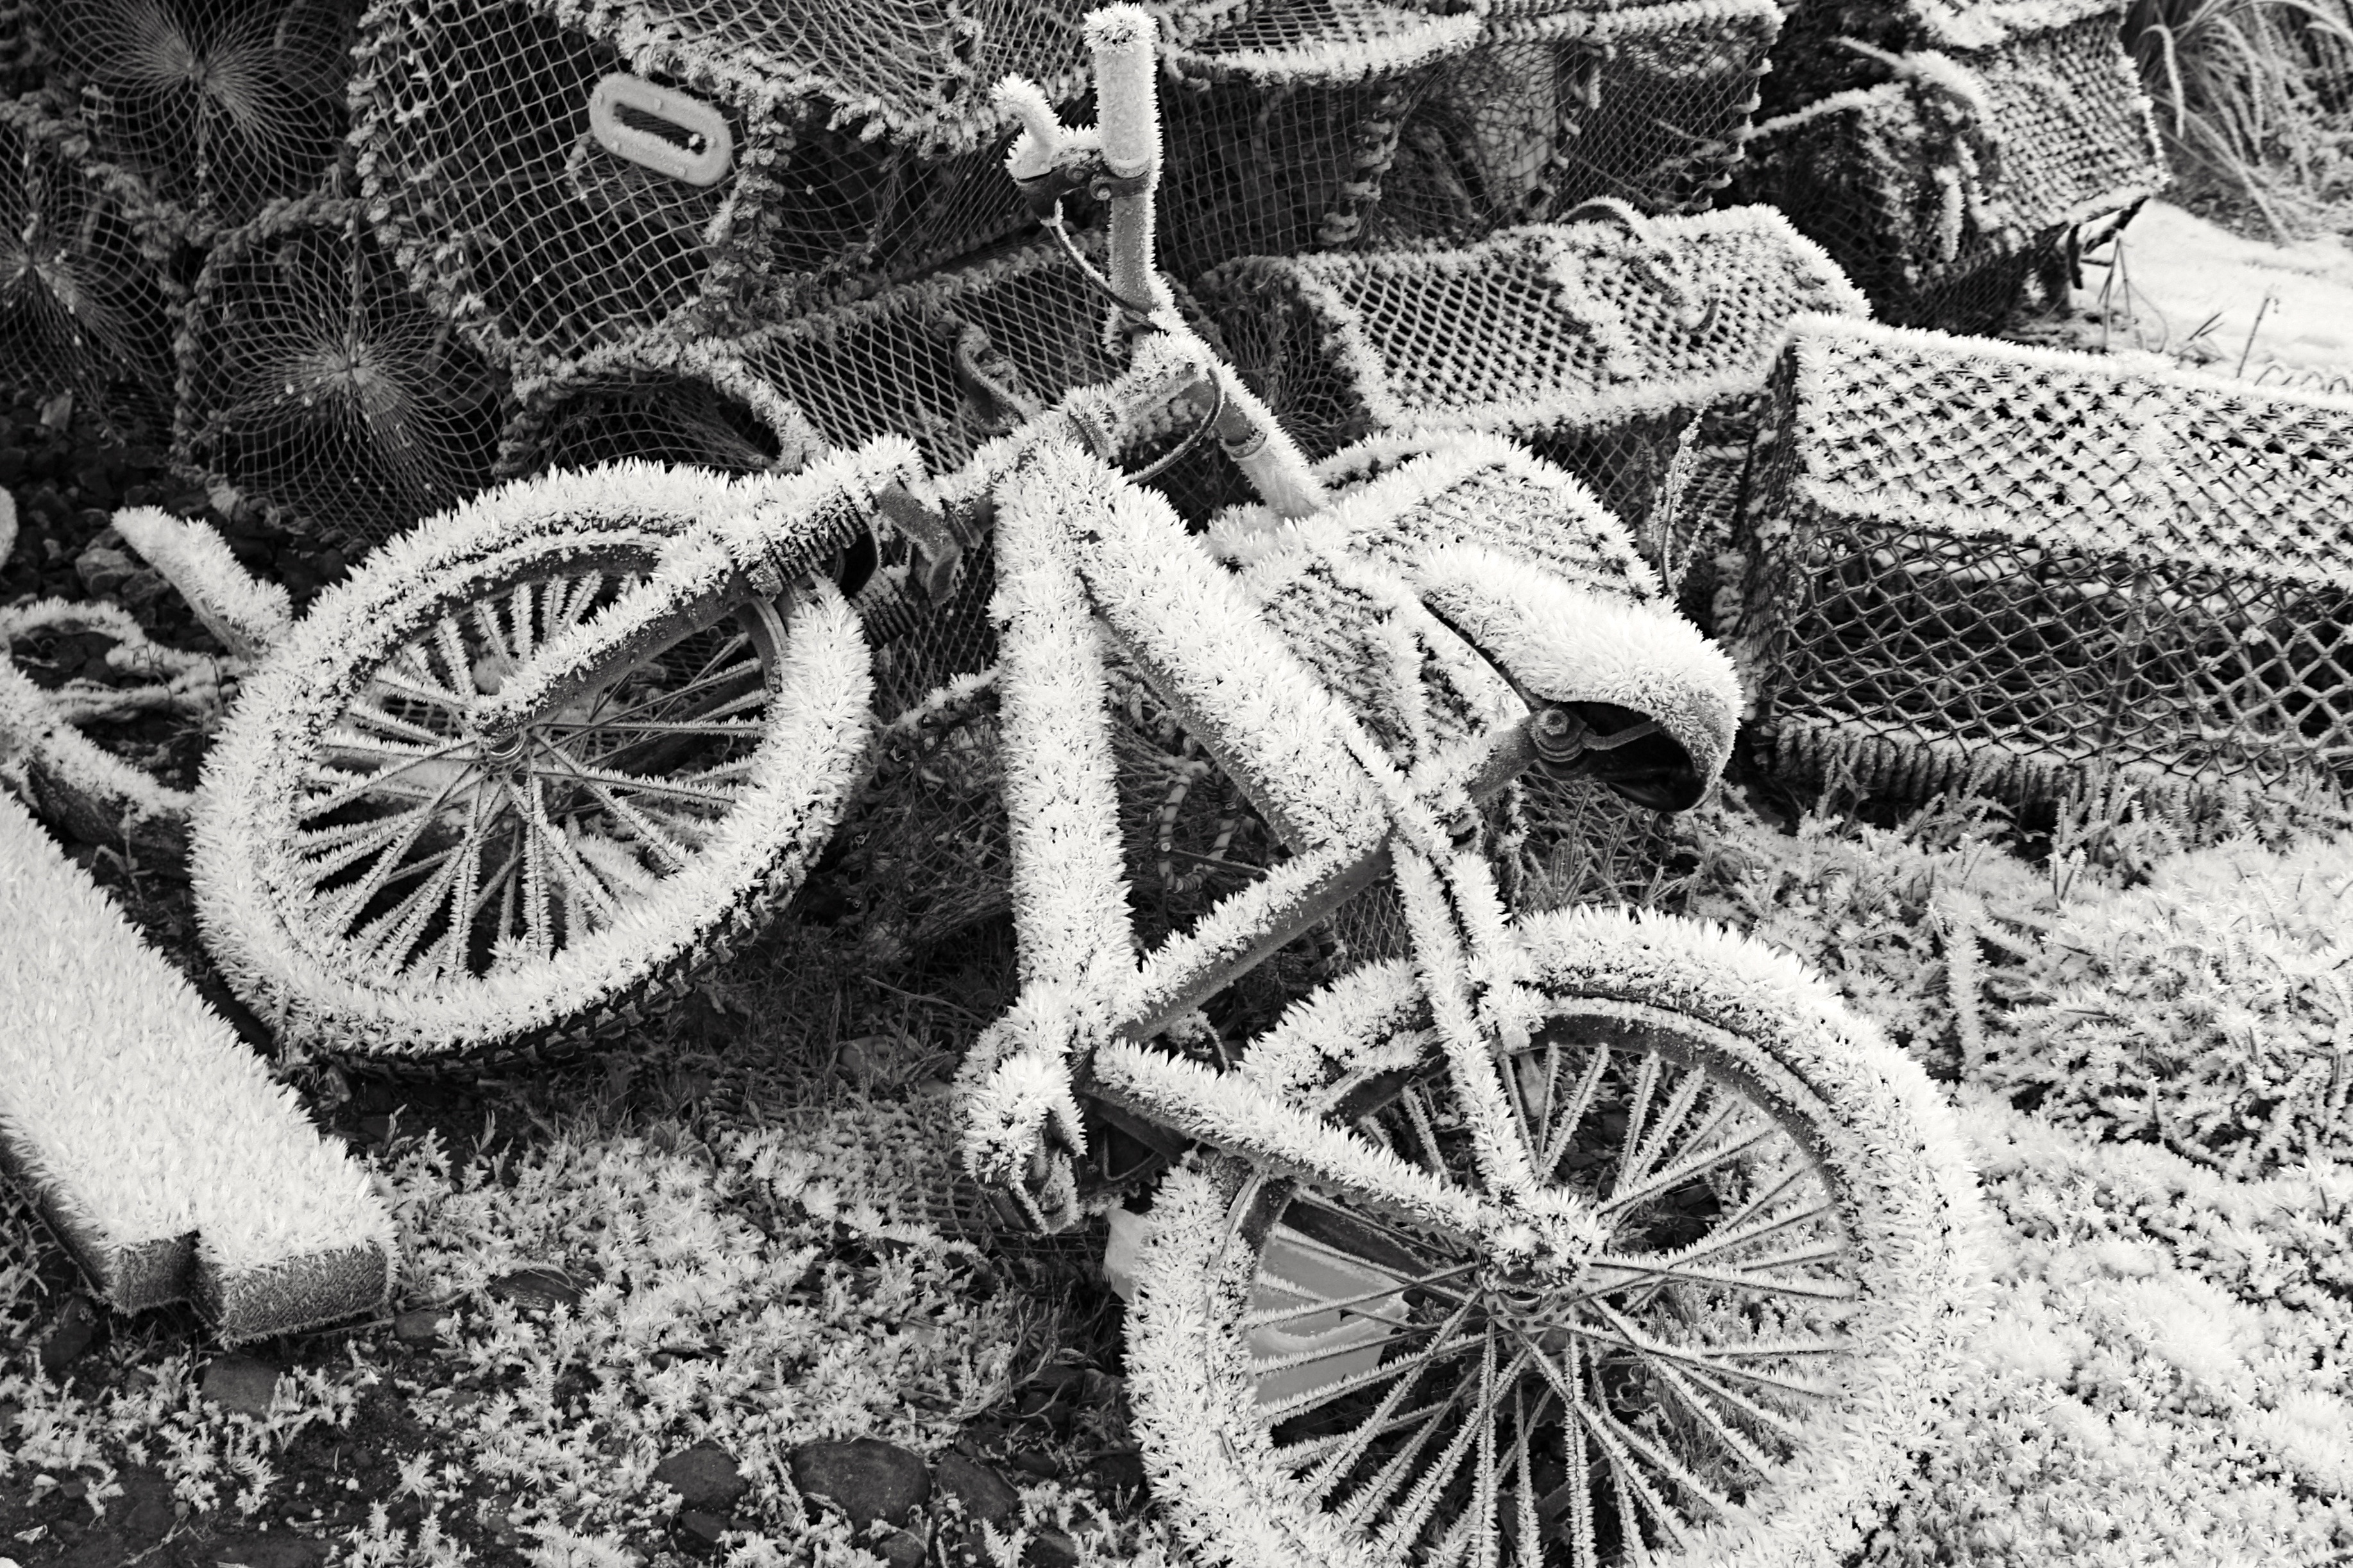 grayscale photo of bicycle